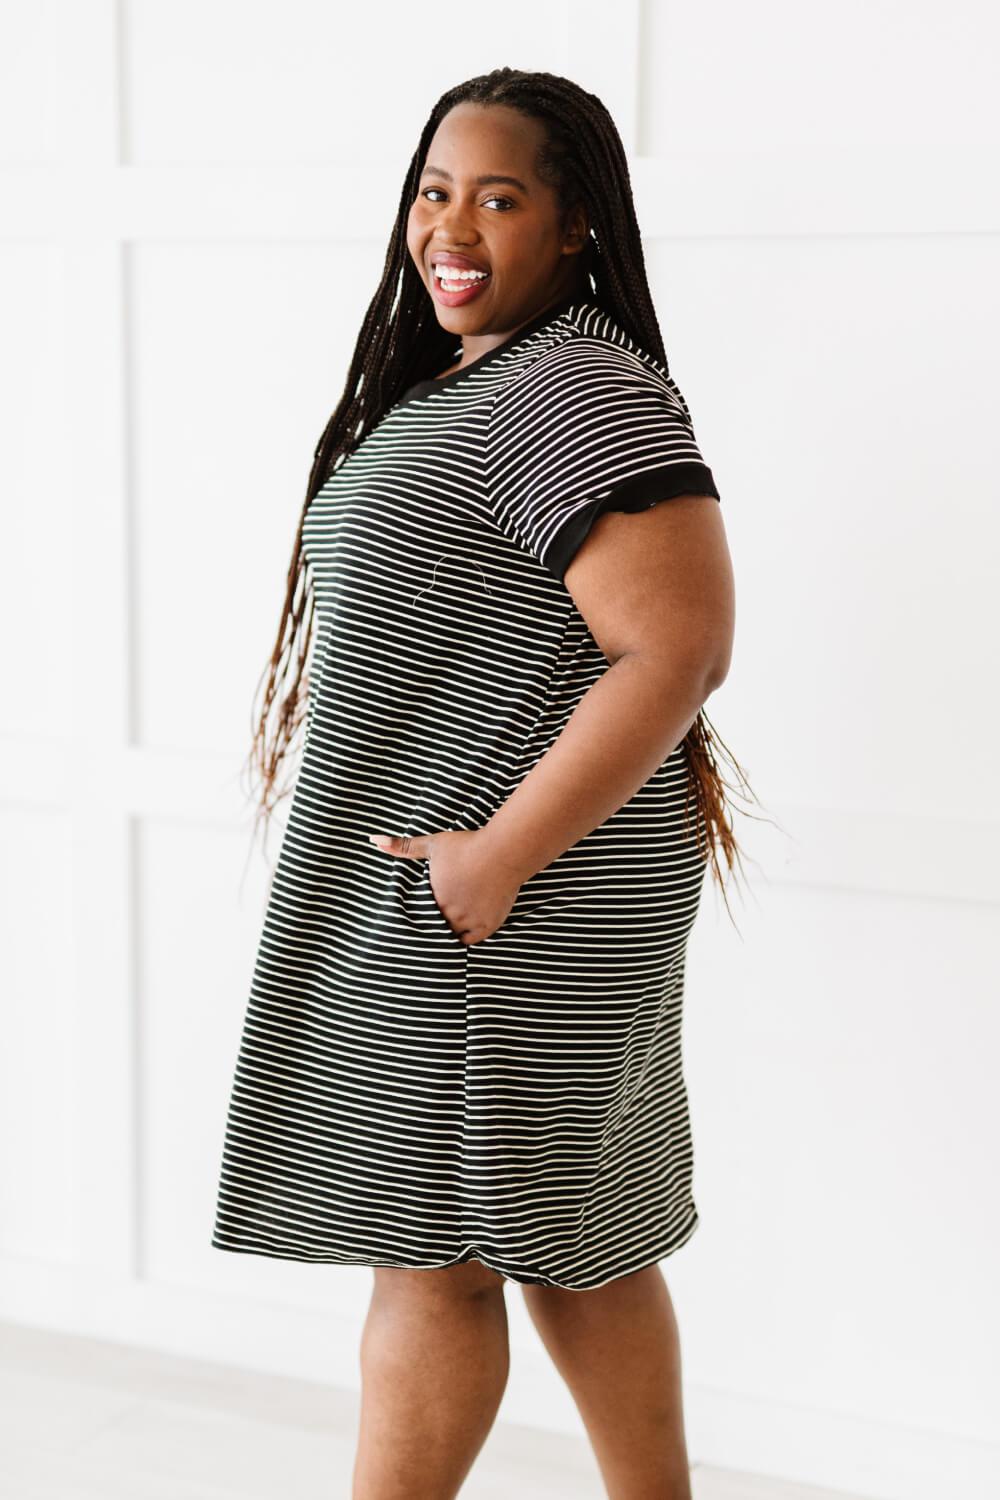 Cotton Bleu Simplicity is Best Full Size Striped T-Shirt Dress in Black BLUE ZONE PLANET